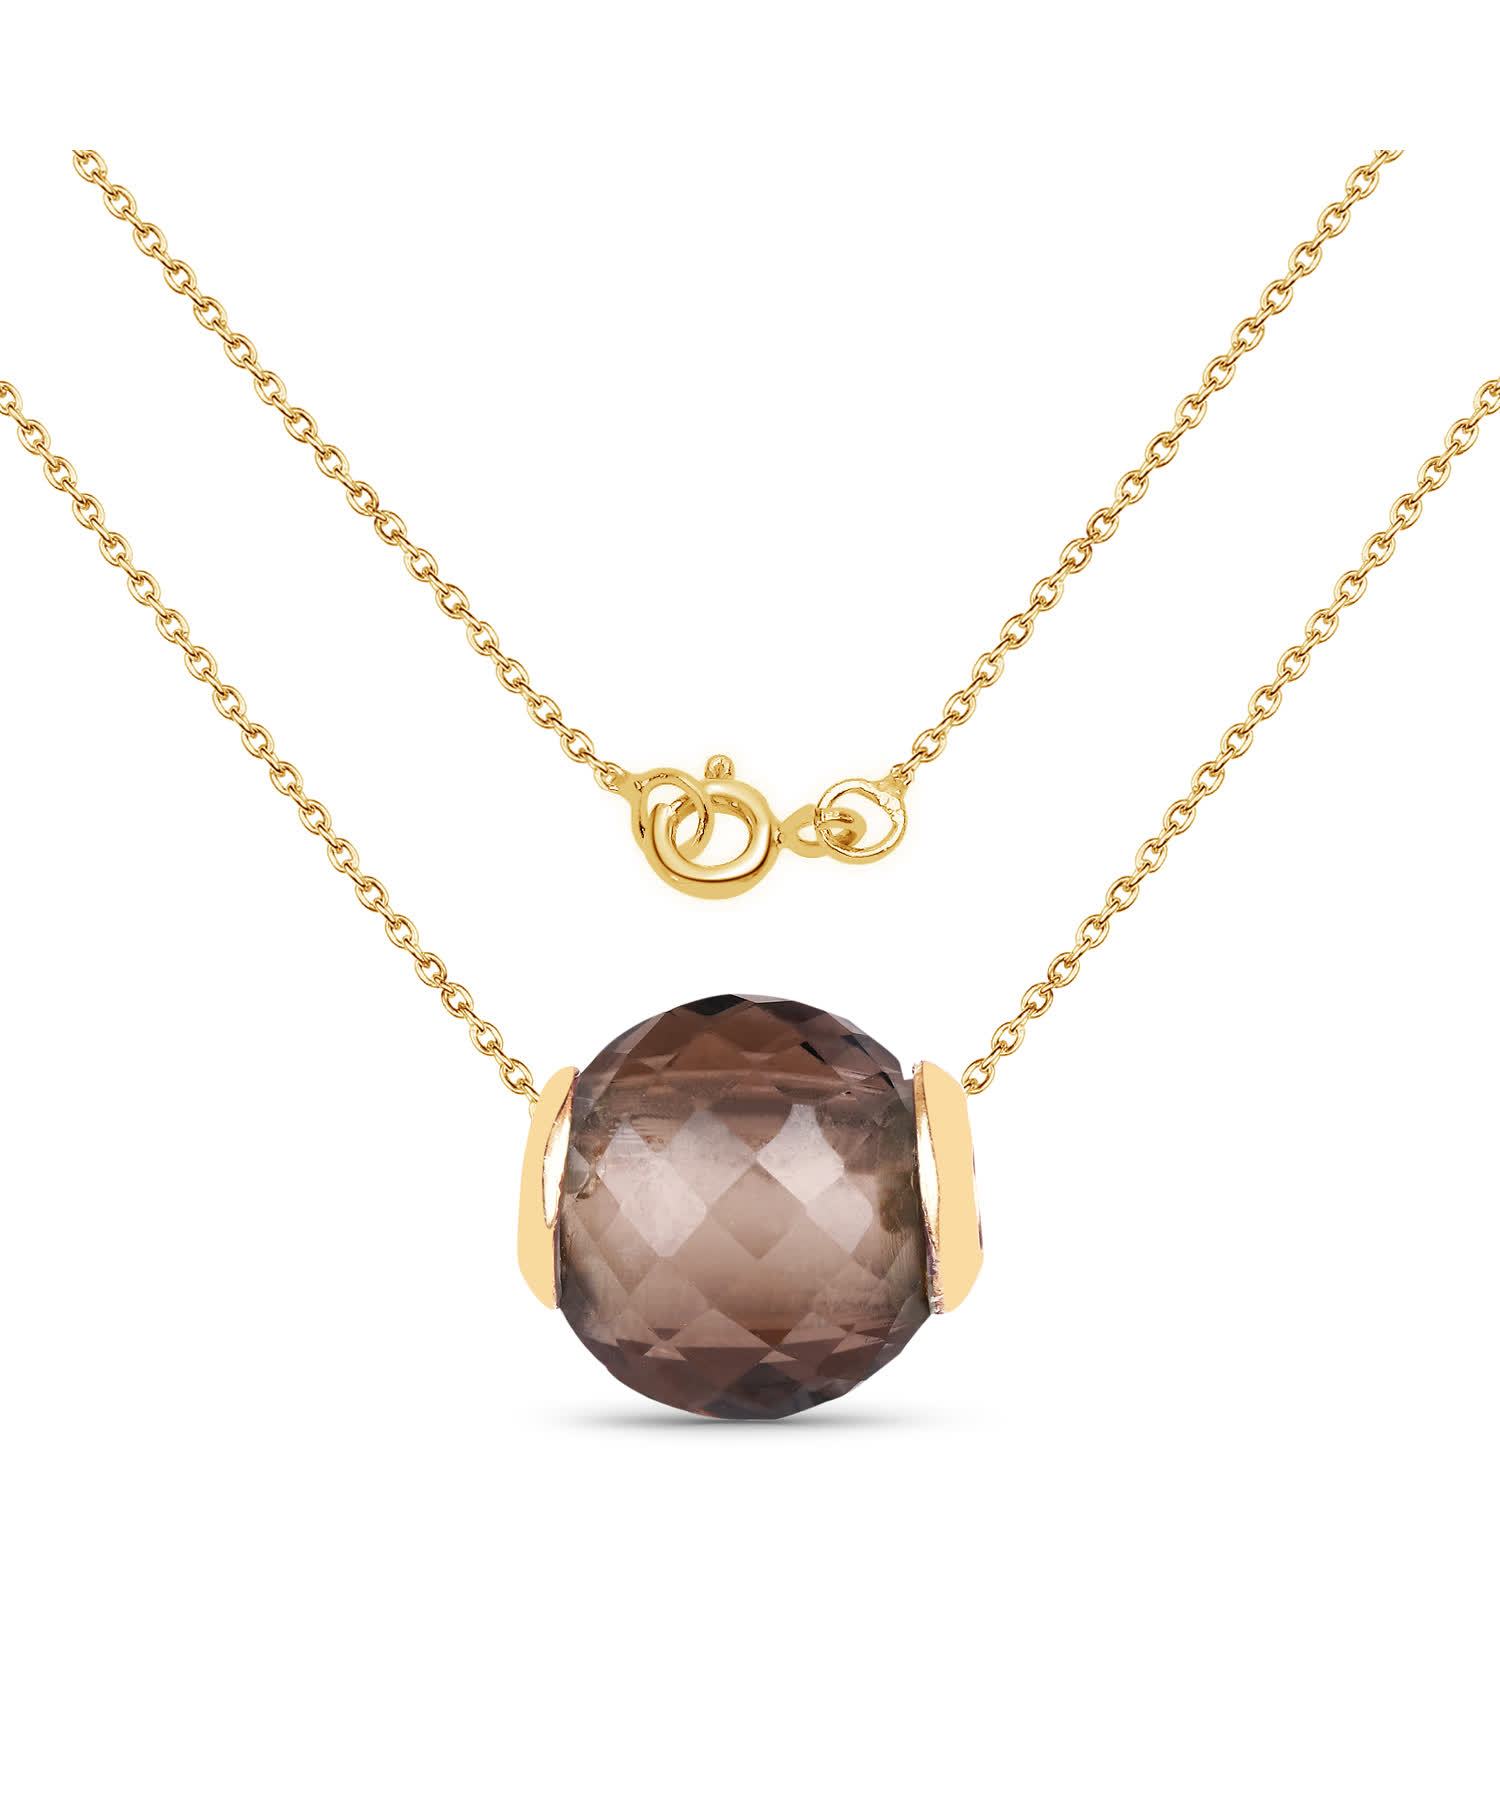 13.01ctw Natural Smoky Quartz 14k Gold Plated 925 Sterling Silver Pendant With Chain View 2